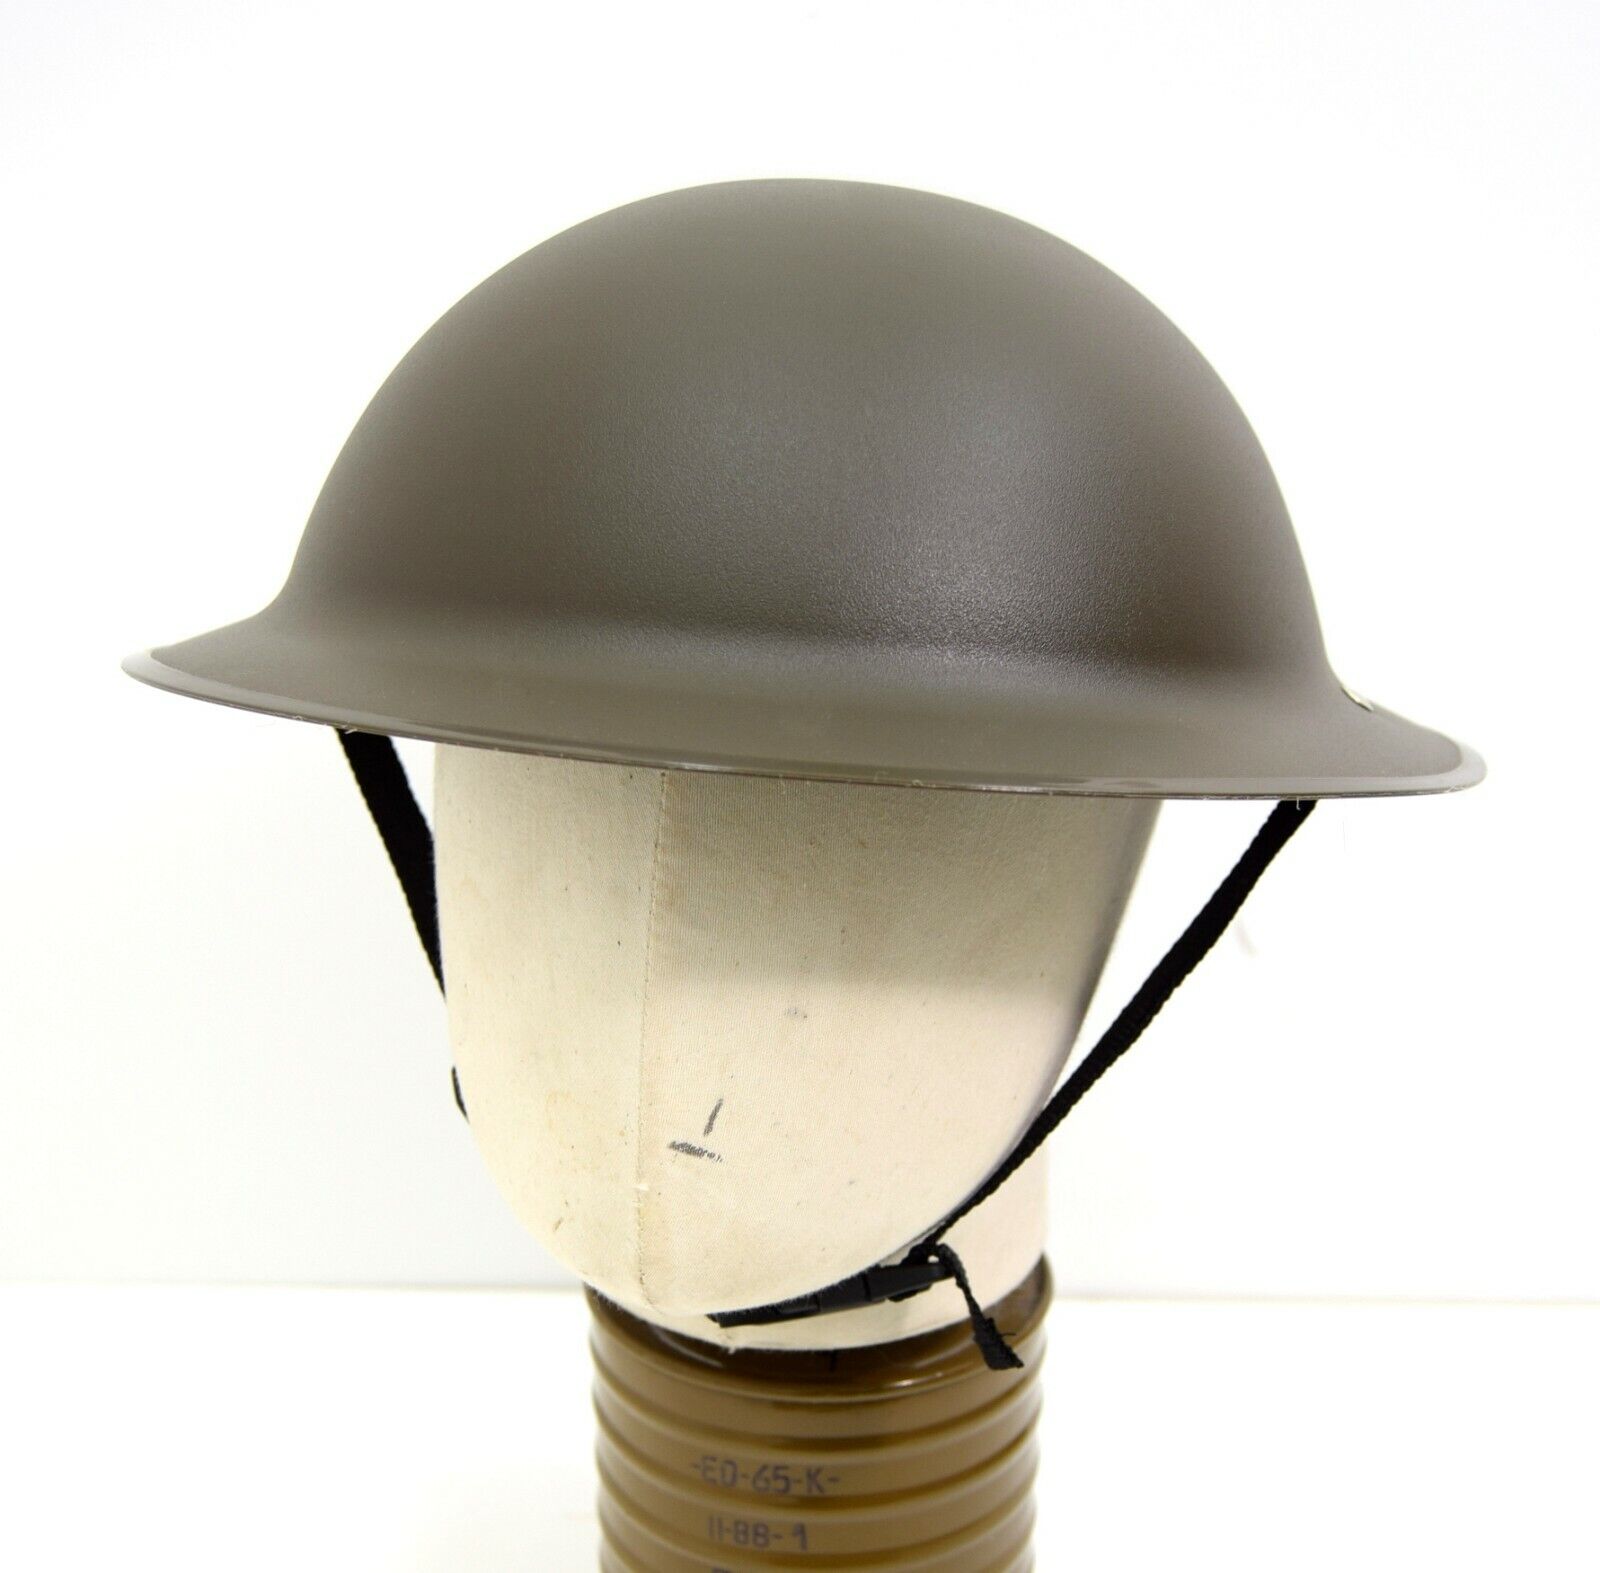 Repro British Army WW2 Plastic Helmet Tommy Doughboy Brodie Style WWII Soldier 